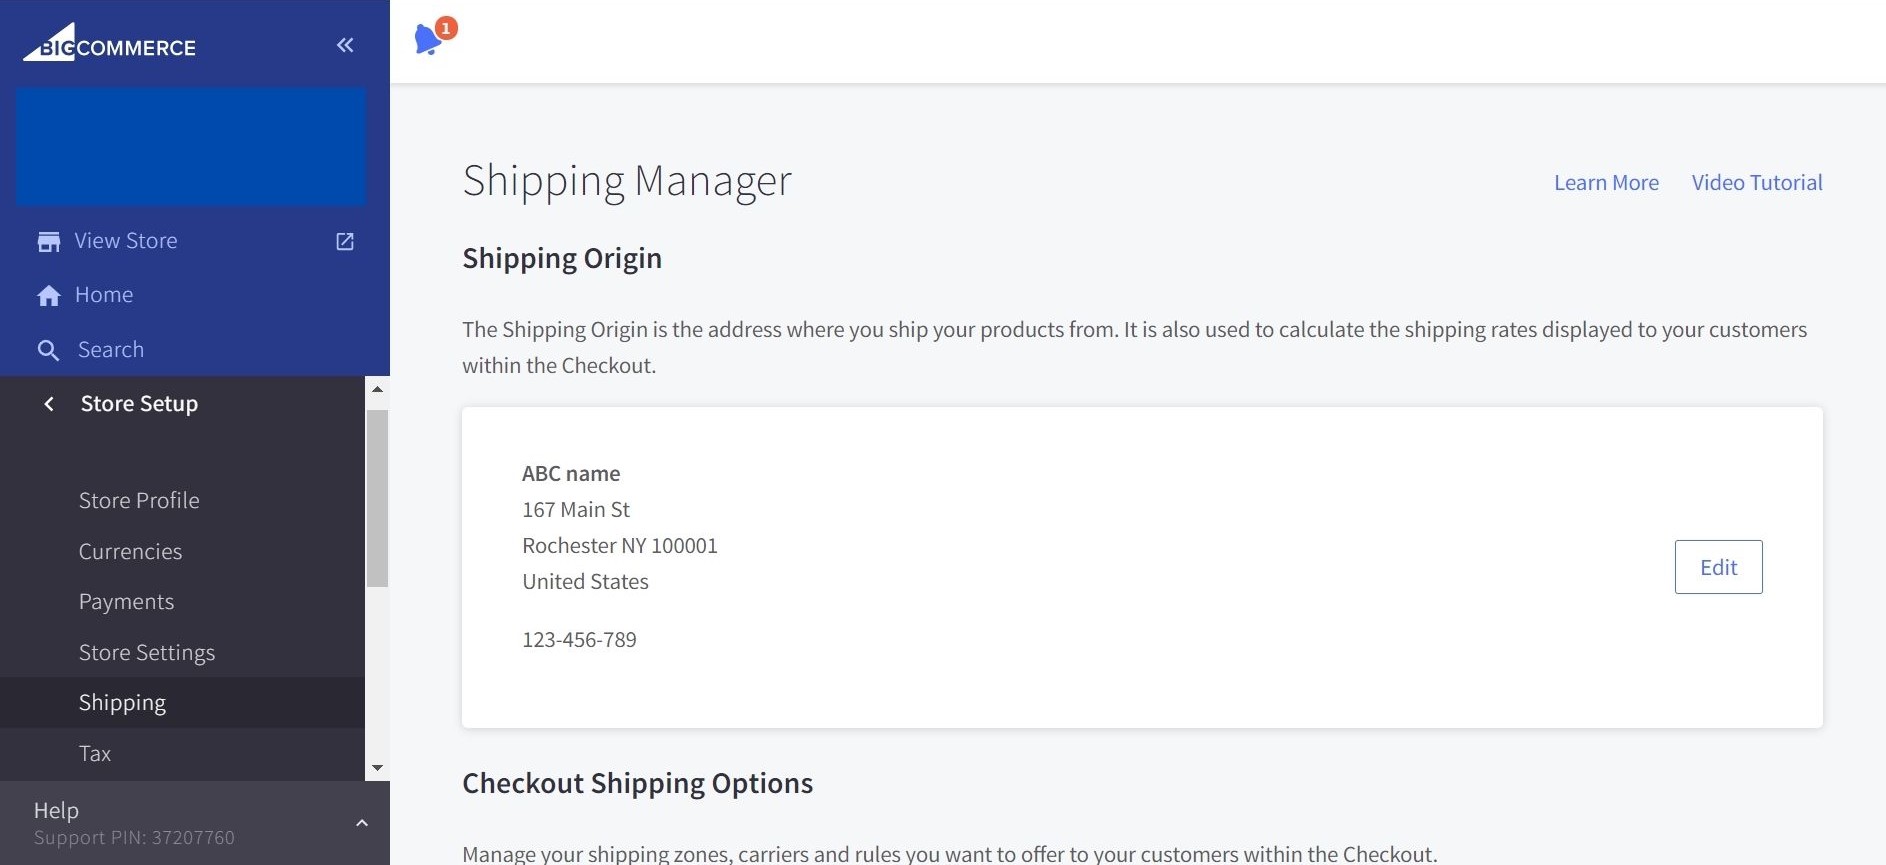 Store Setup > Shipping, this is how your screen will look like: 